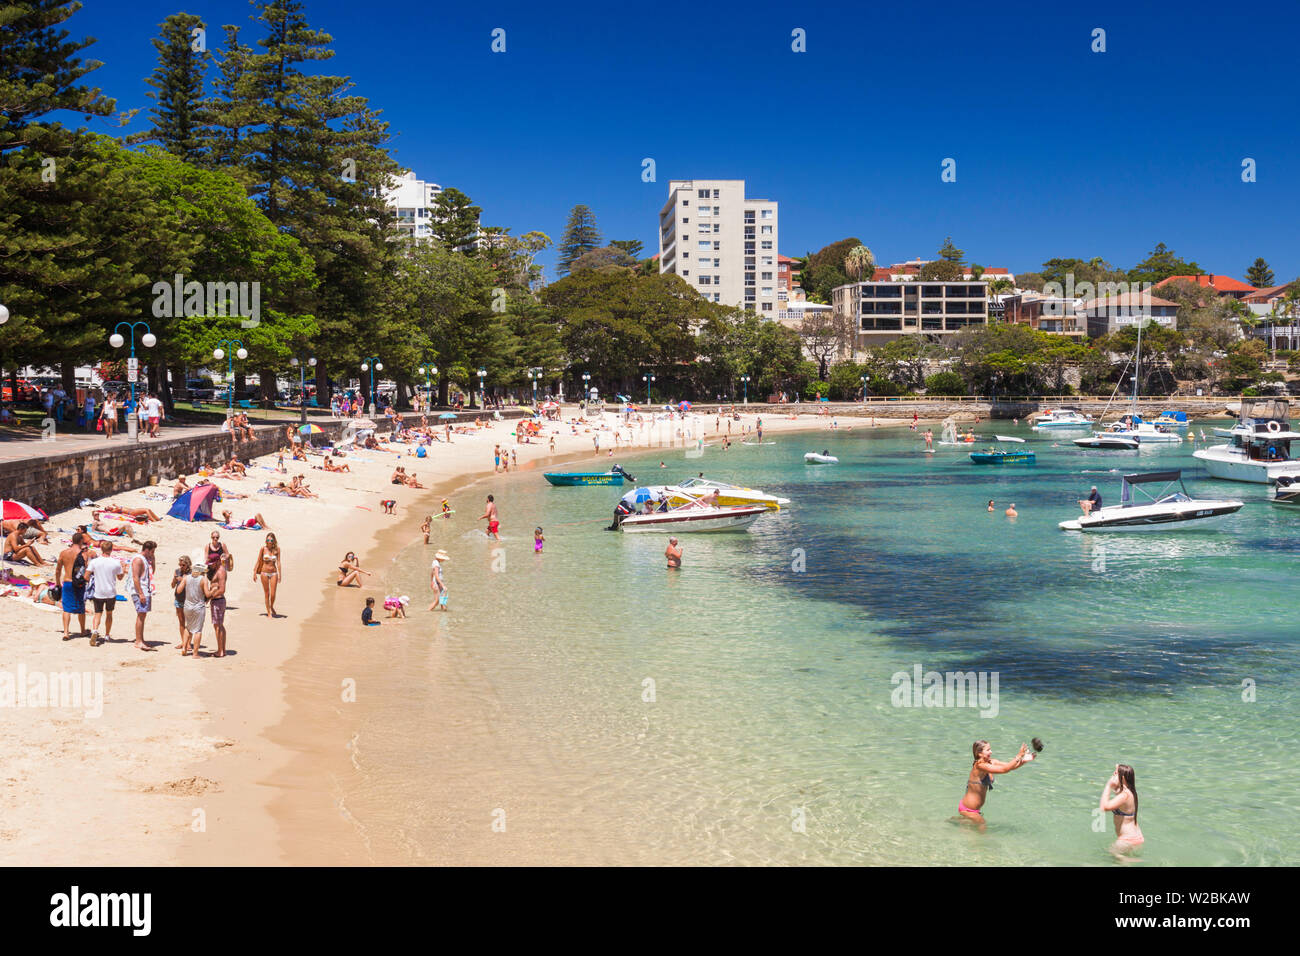 Australien, New South Wales, New South Wales, Sydney, Männlich, Manly Cove Beach Stockfoto